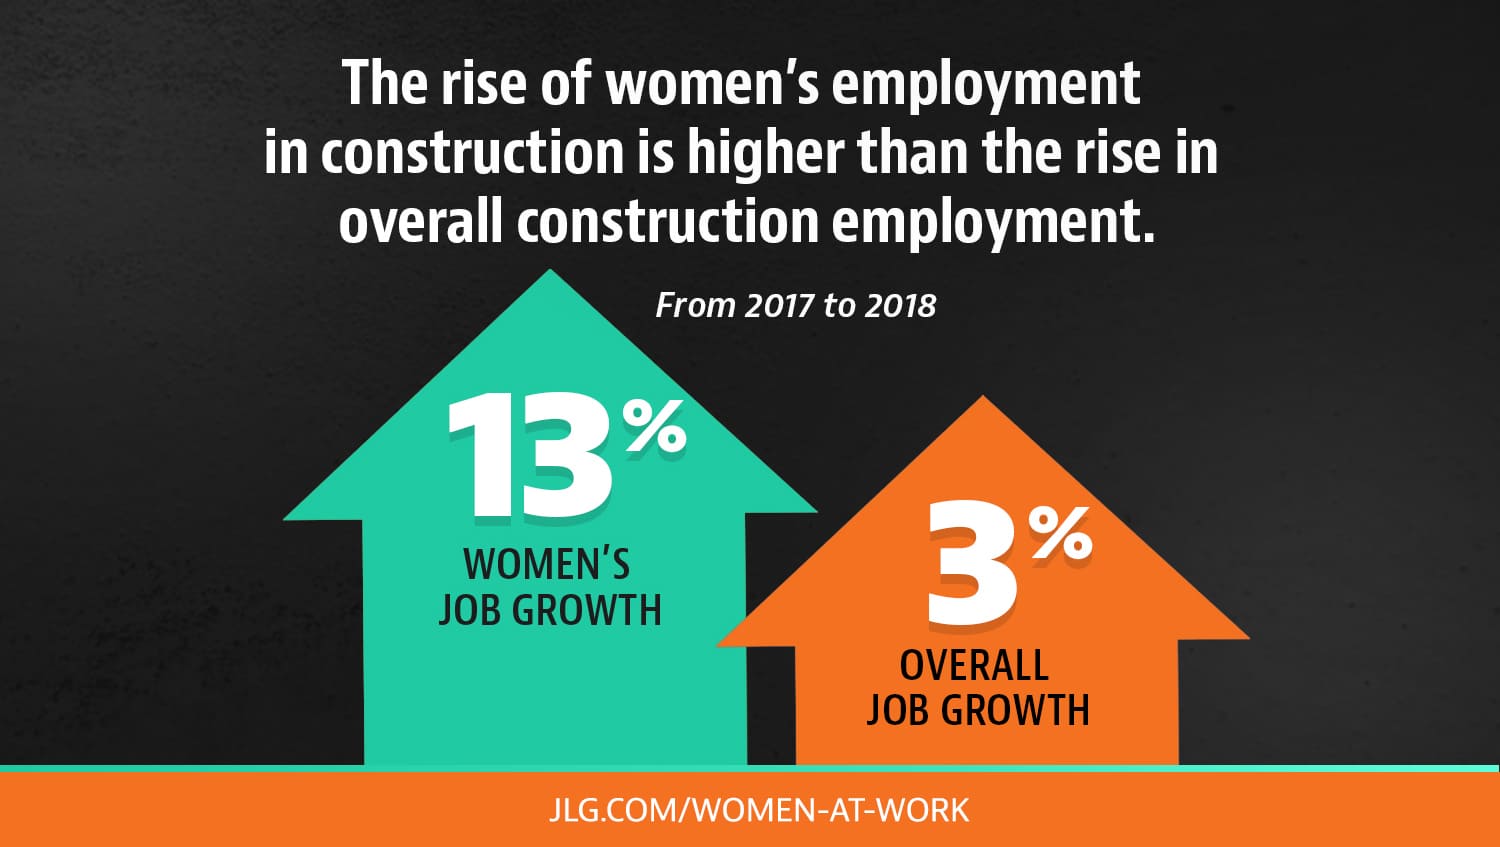 The rise of women’s employment in construction is higher than the rise in overall construction employment.